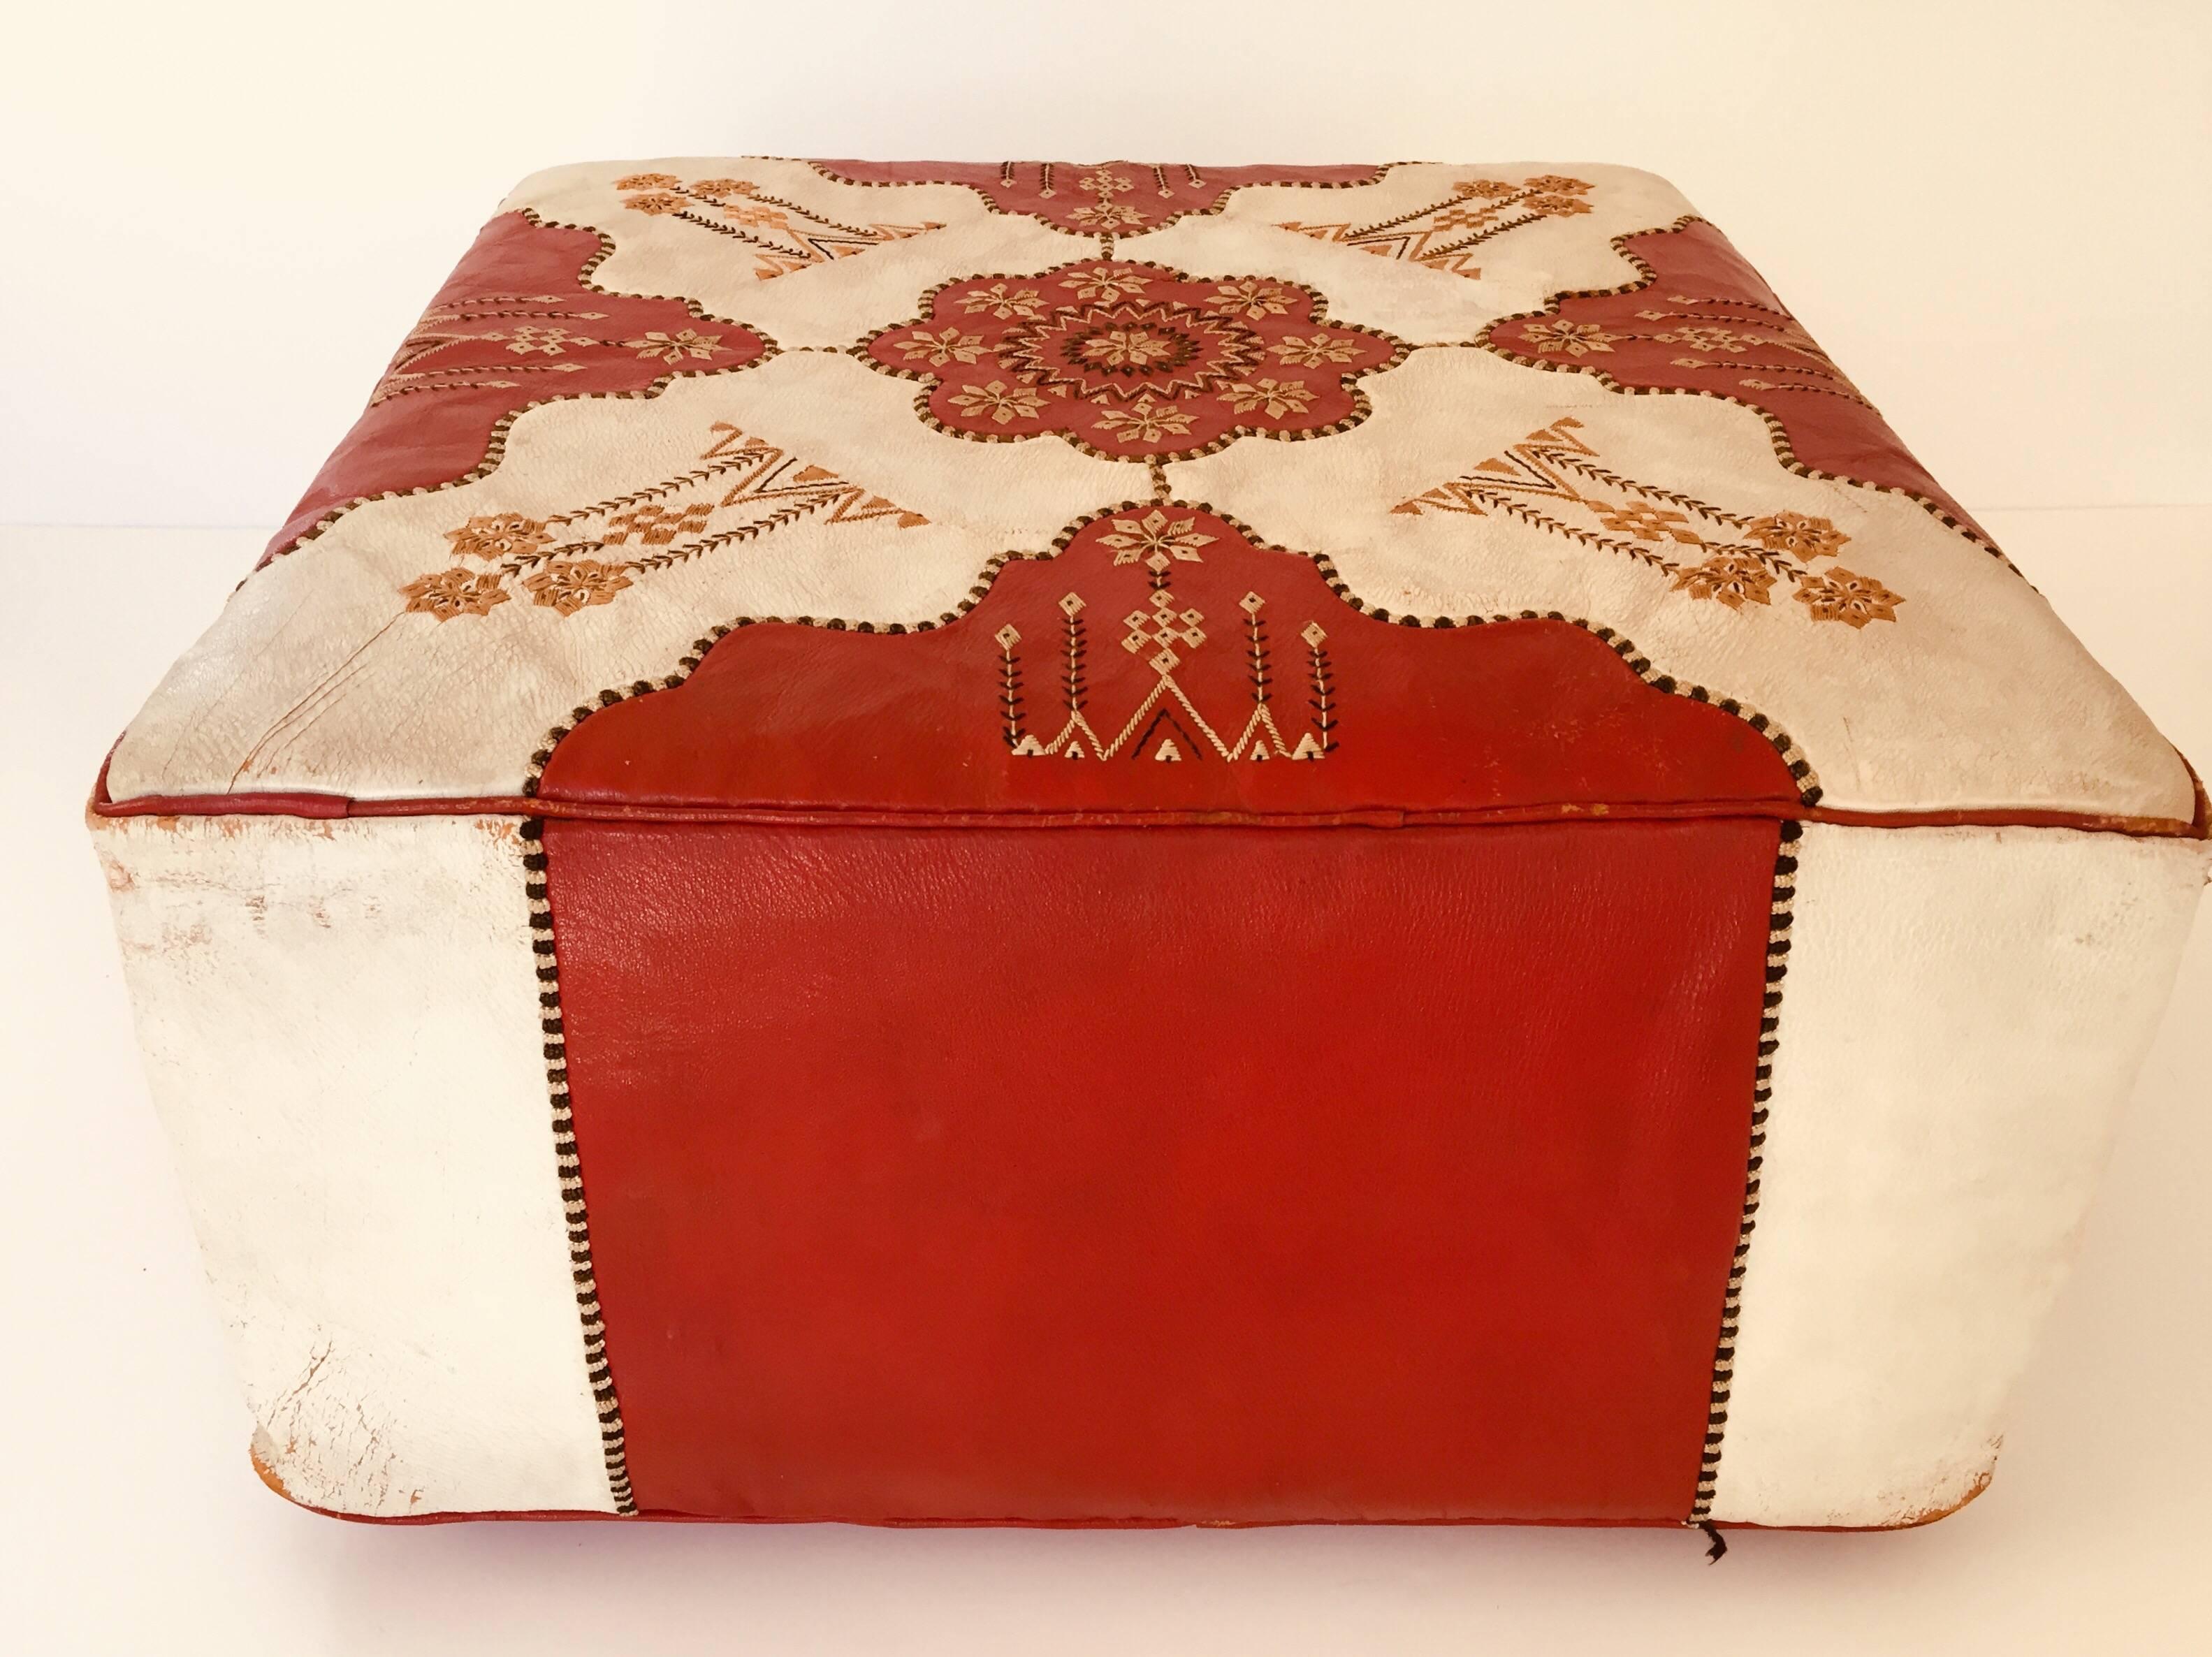 Large red and white square leather Moroccan ottoman.
Square shape pouf in red and white leather embroidered with white silk threads.
Vintage circa 1960, very well used, great patina.